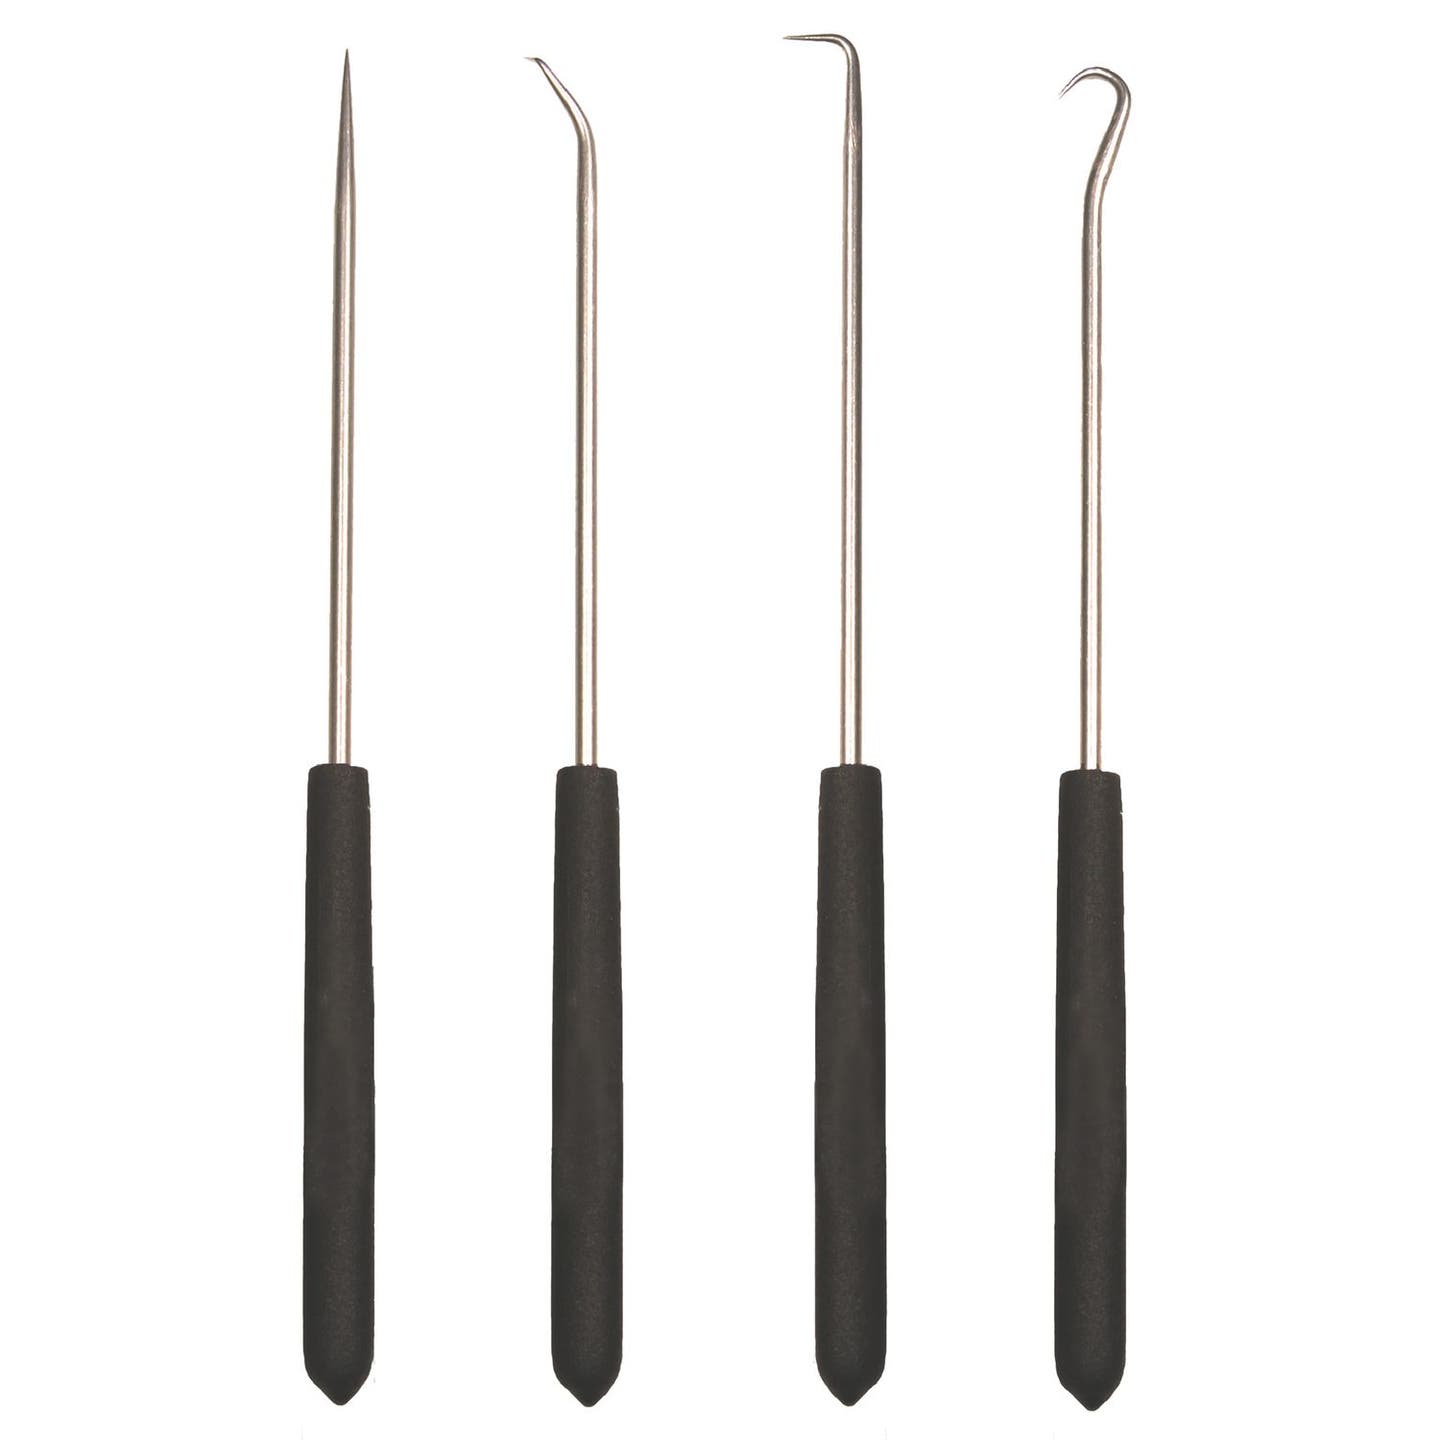 4 PIECE HOOK AND PICK SET WITH CUSHION GRIP